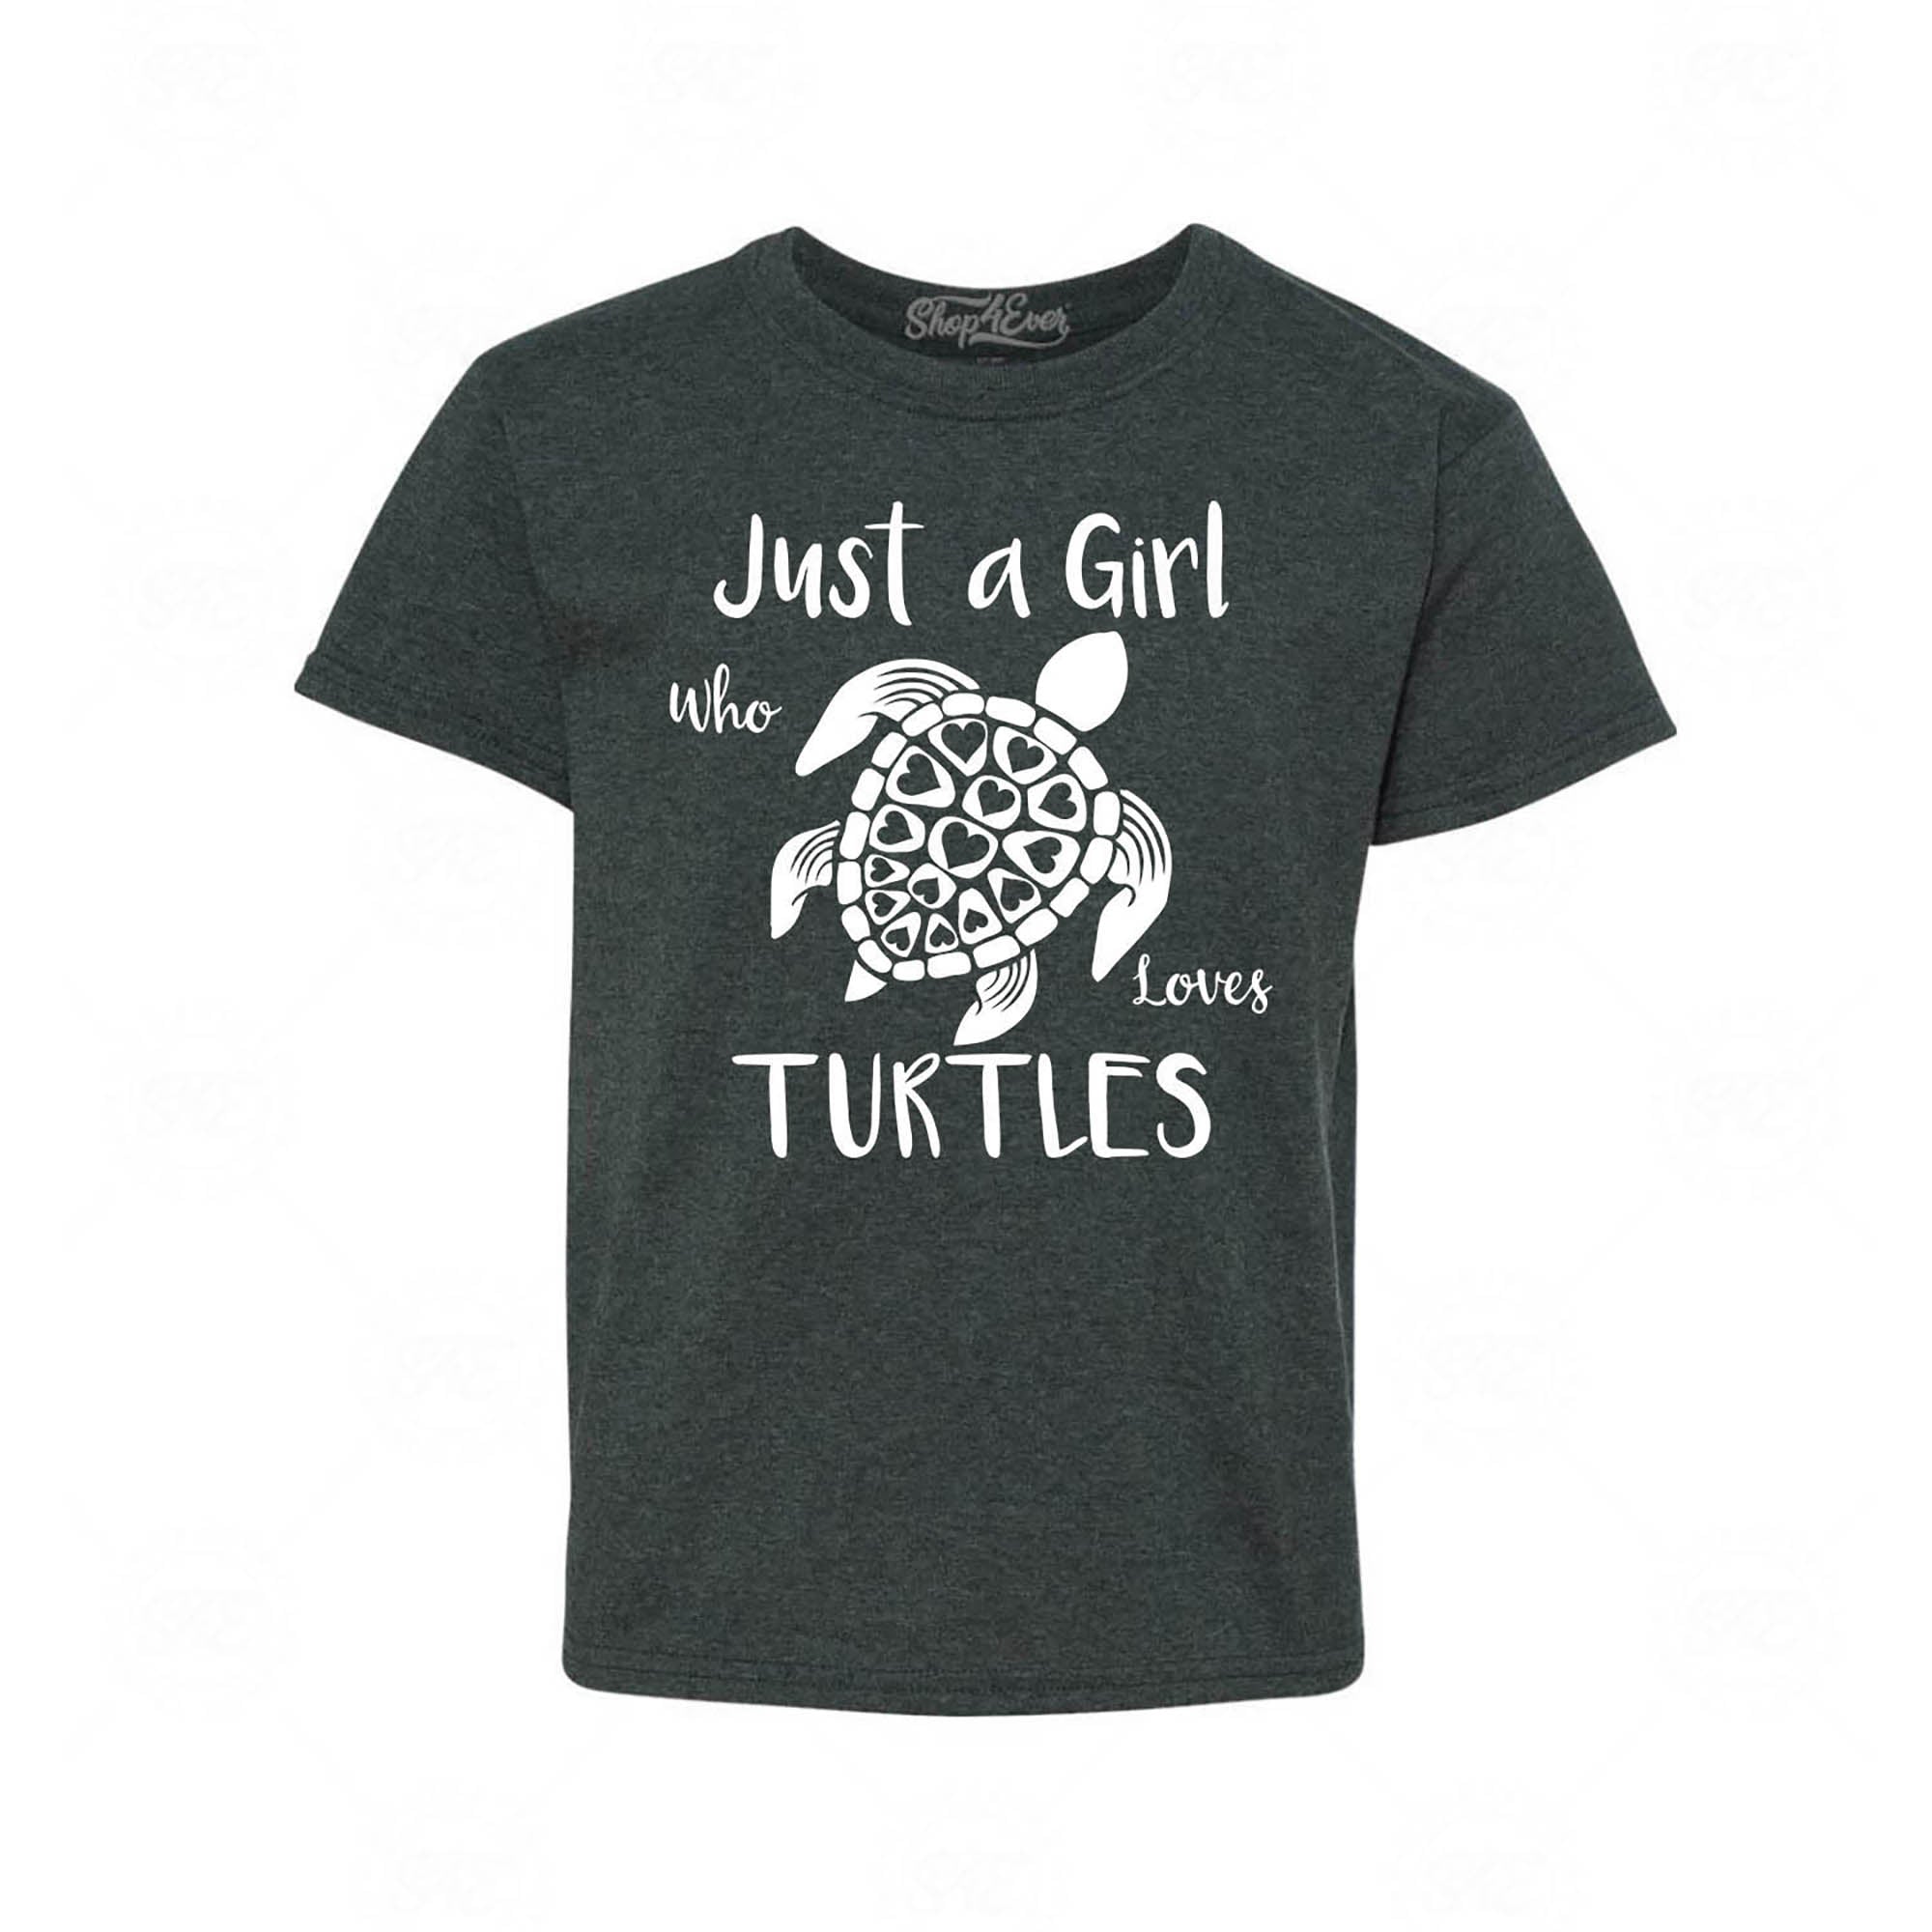 Just A Girl Who Loves Turtles Youth's T-Shirt